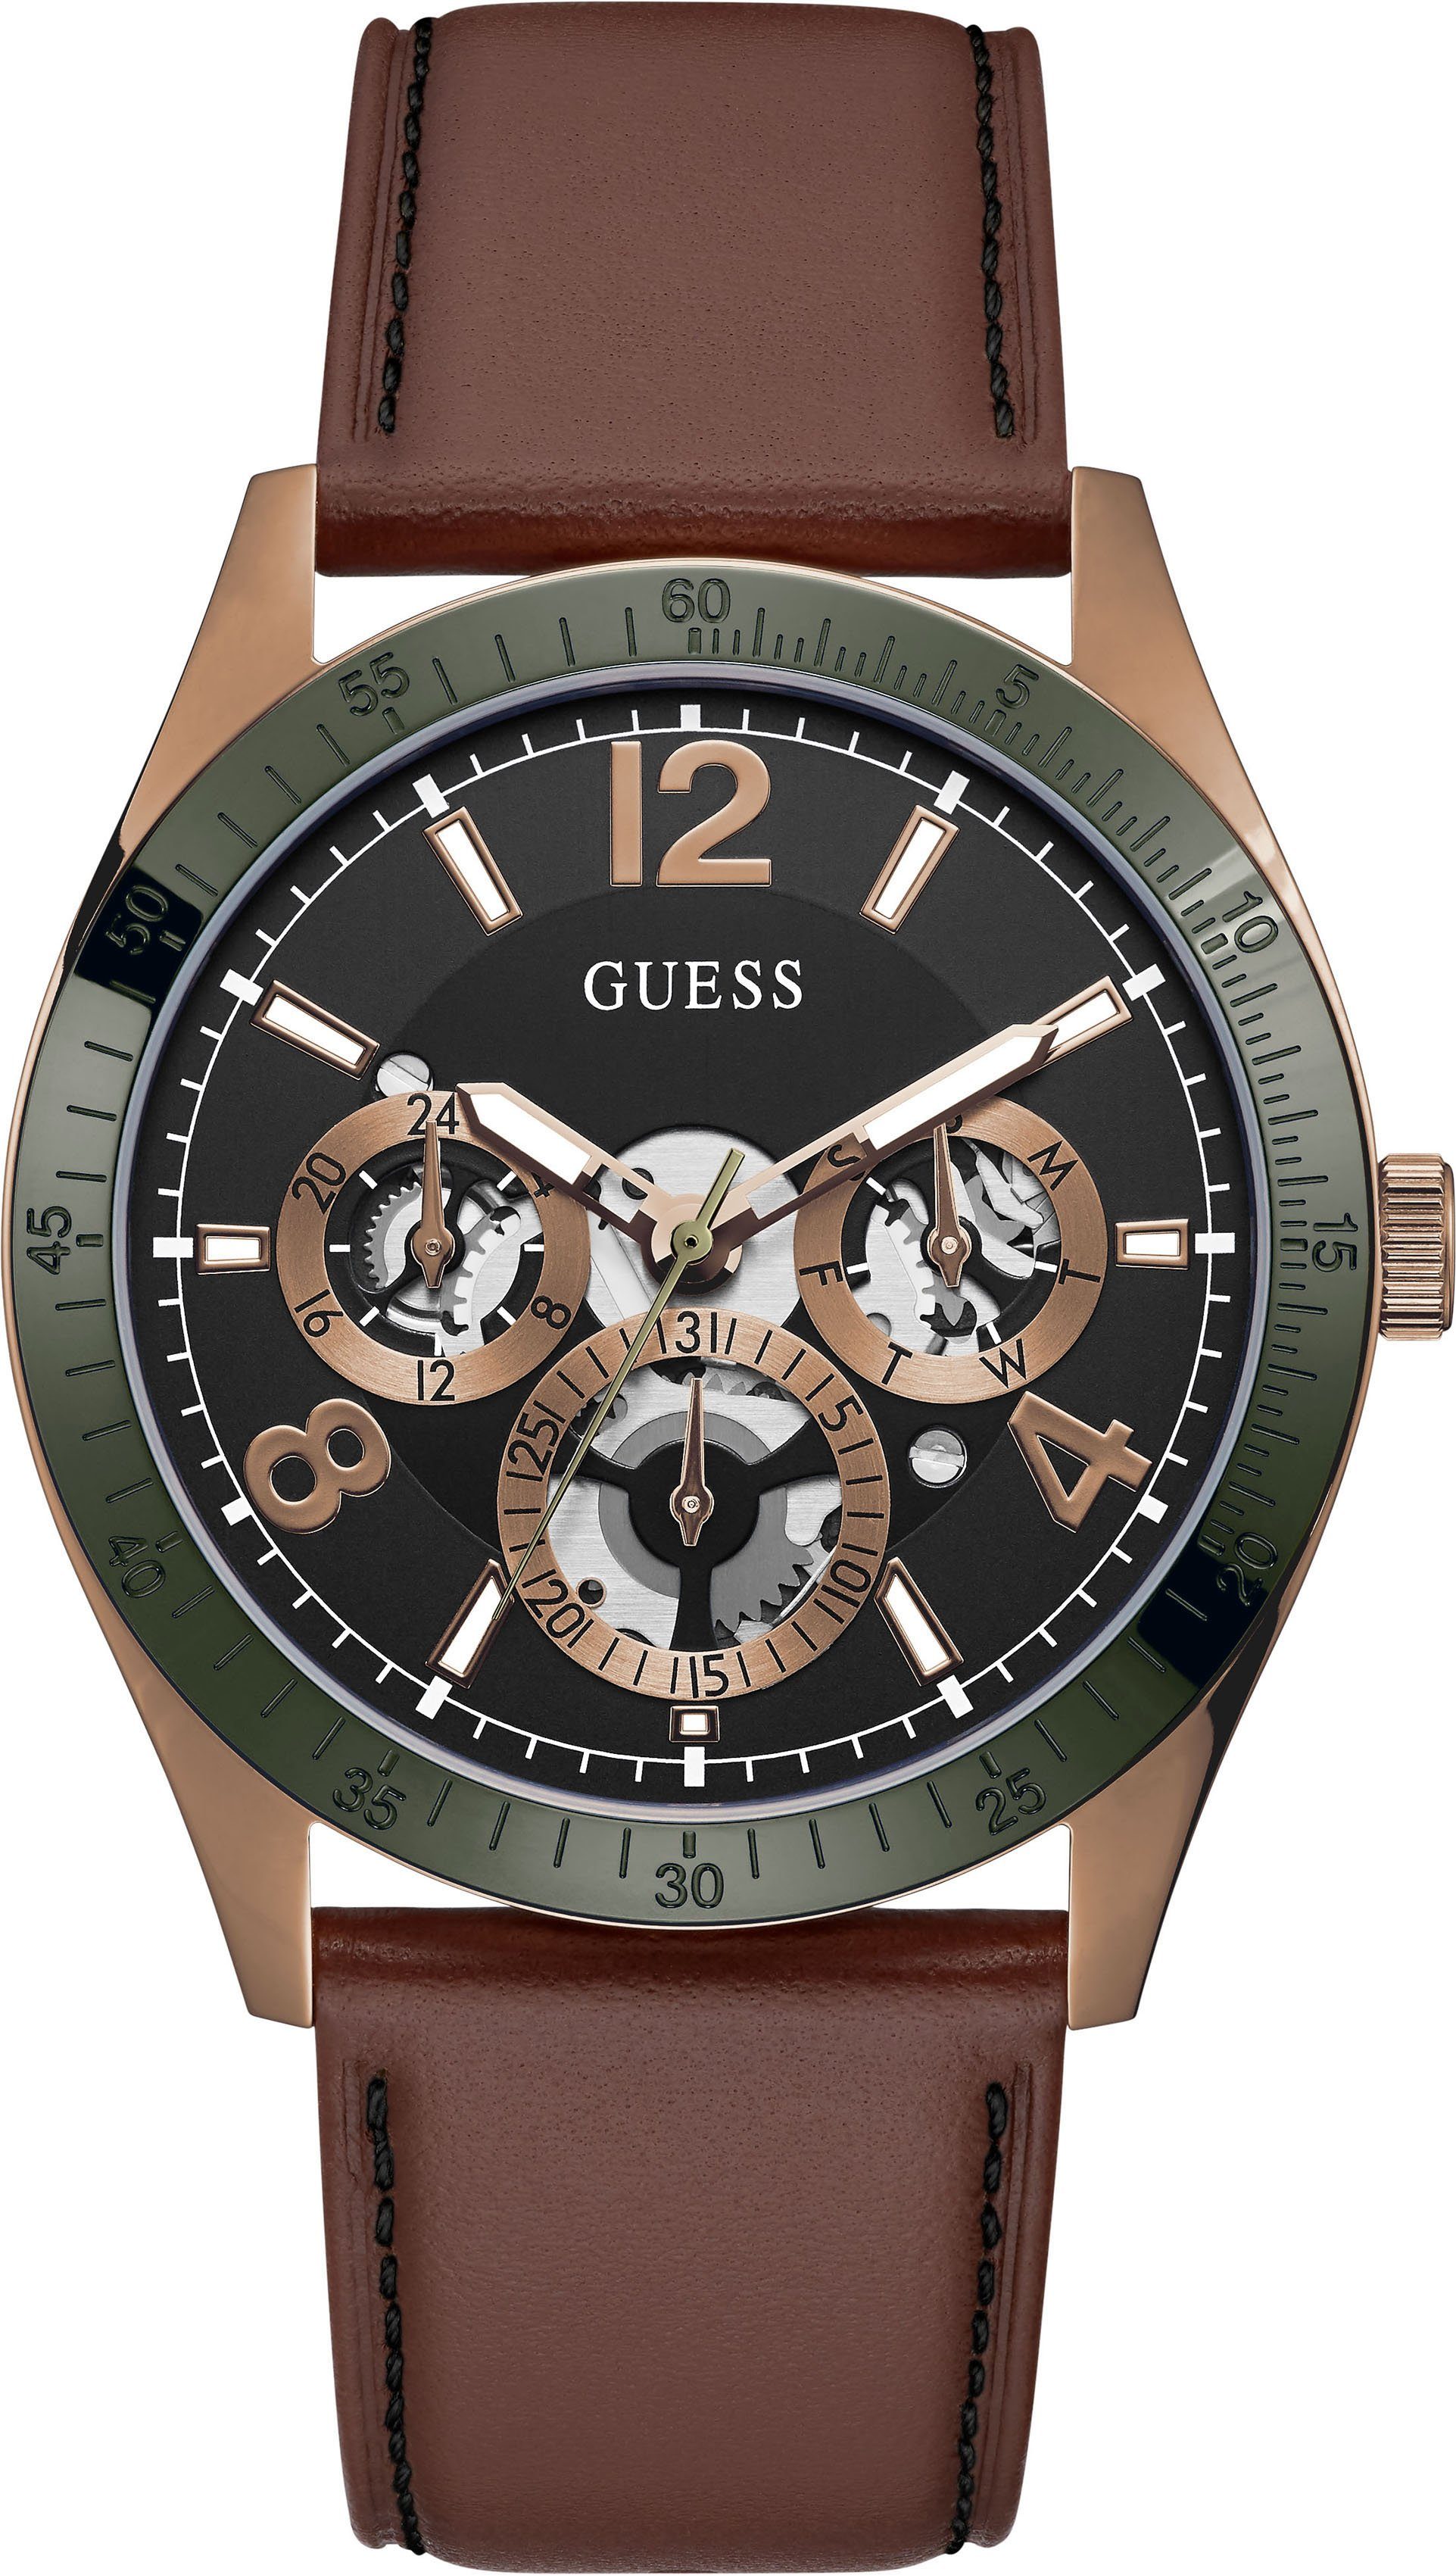 Guess Multifunktionsuhr GW0216G2,VECTOR